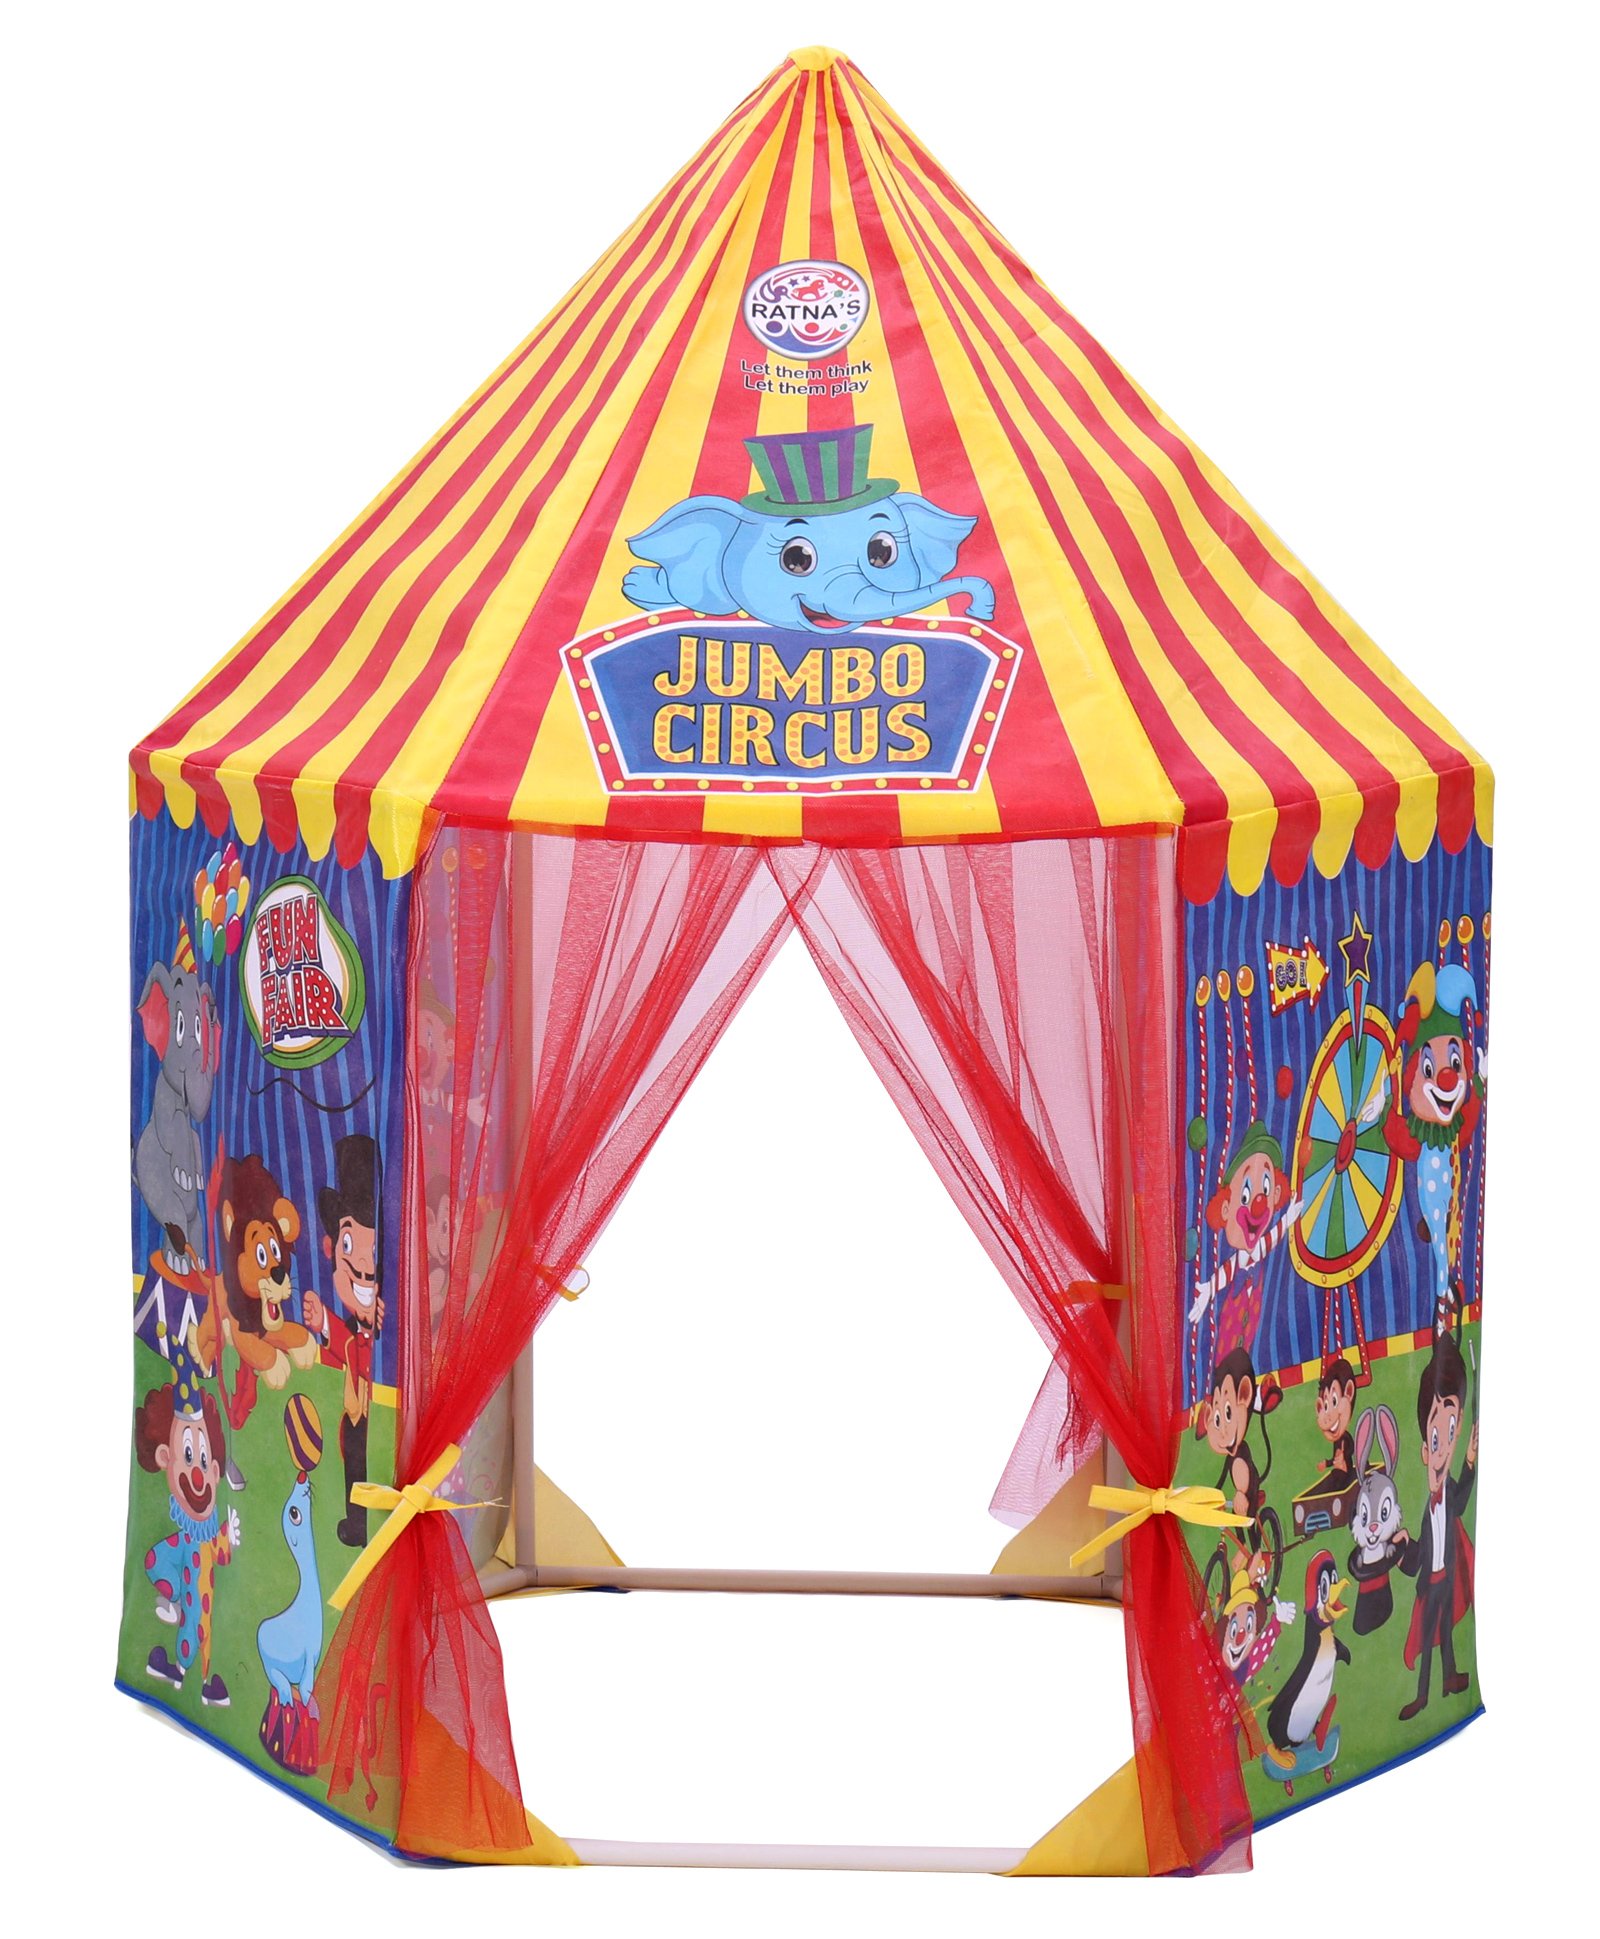 Ratnas Circus Theme Jumbo Play Tent - Multicolor Online India, Buy Outdoor  Play Equipment for (3-8 Years) at  - 9293033